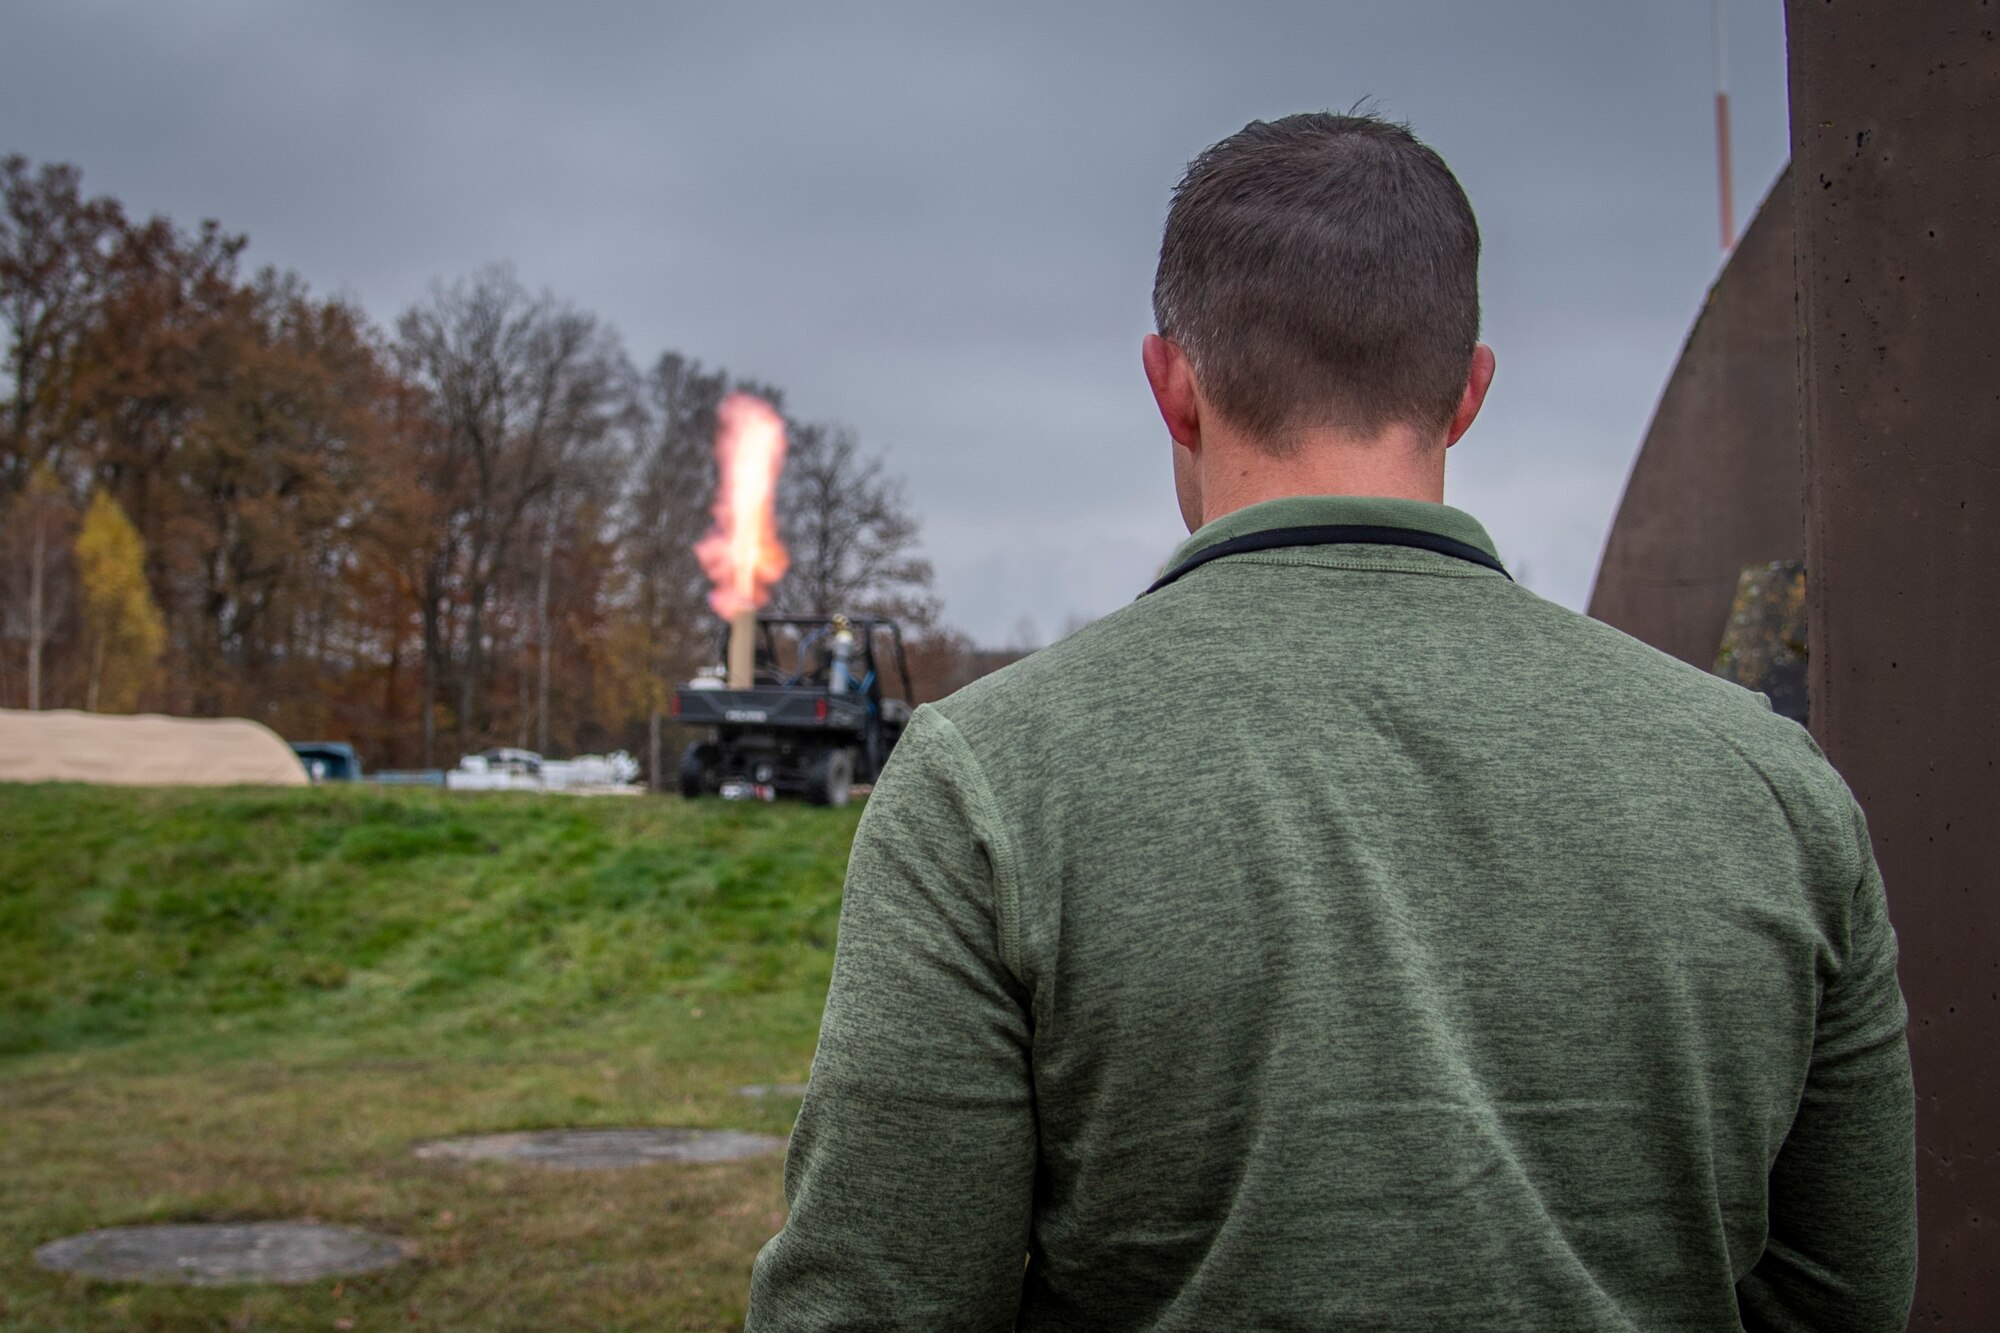 U.S. Air Force Master Sgt. Nicholas Mosier, 435th Construction and Training Squadron cadre, uses a propane tank to simulate a base attack at Ramstein Air Base, Germany during a Silver Flag training course, Nov. 17, 2021.